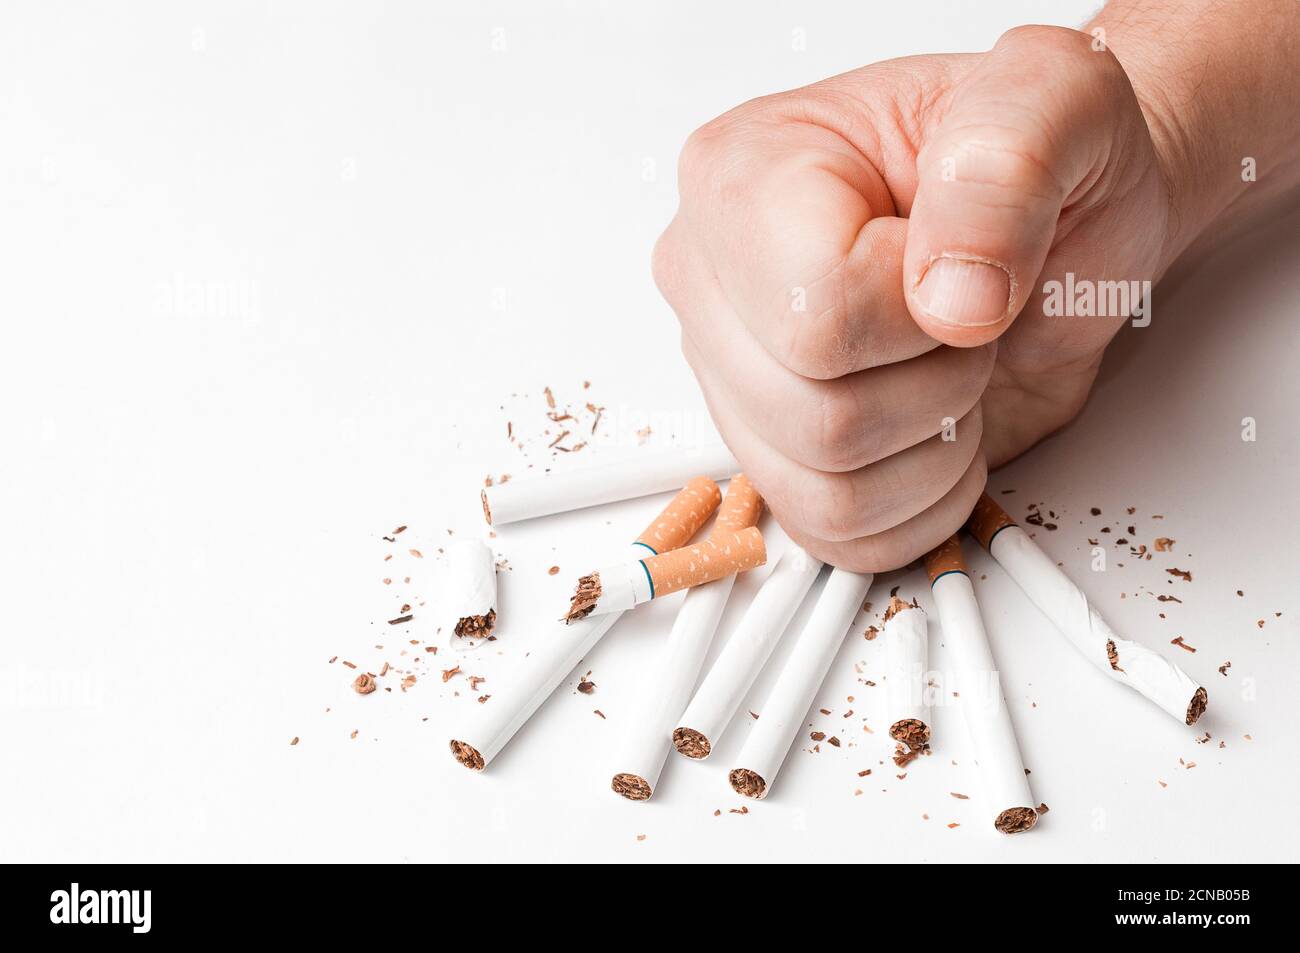 Quit smoking concept: man smashes some cigarettes with his fist Stock Photo